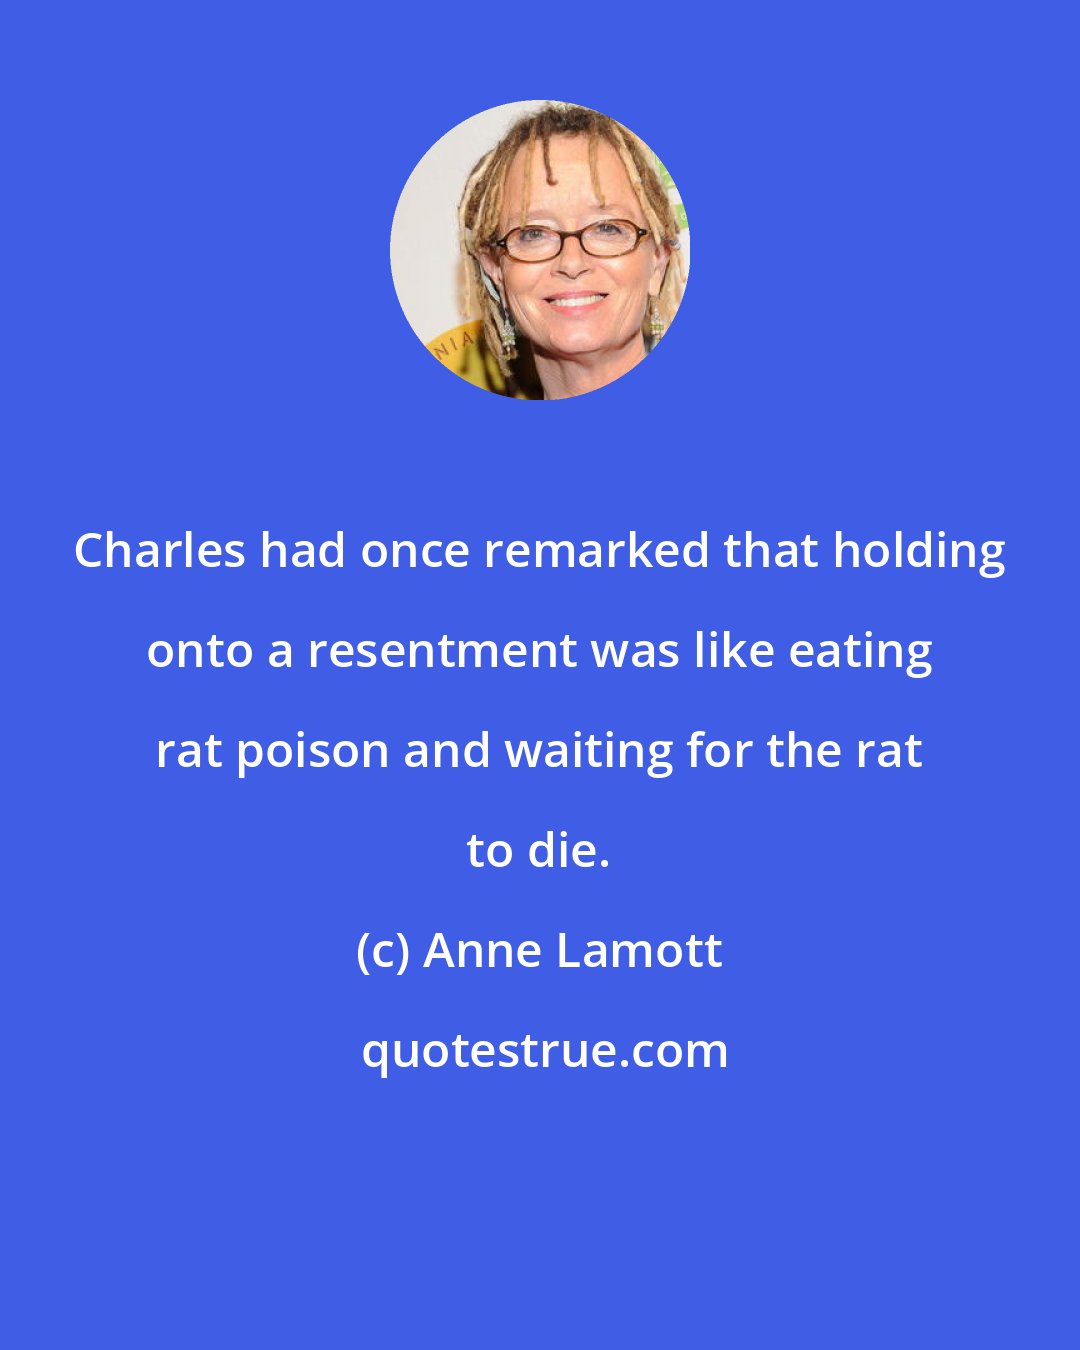 Anne Lamott: Charles had once remarked that holding onto a resentment was like eating rat poison and waiting for the rat to die.